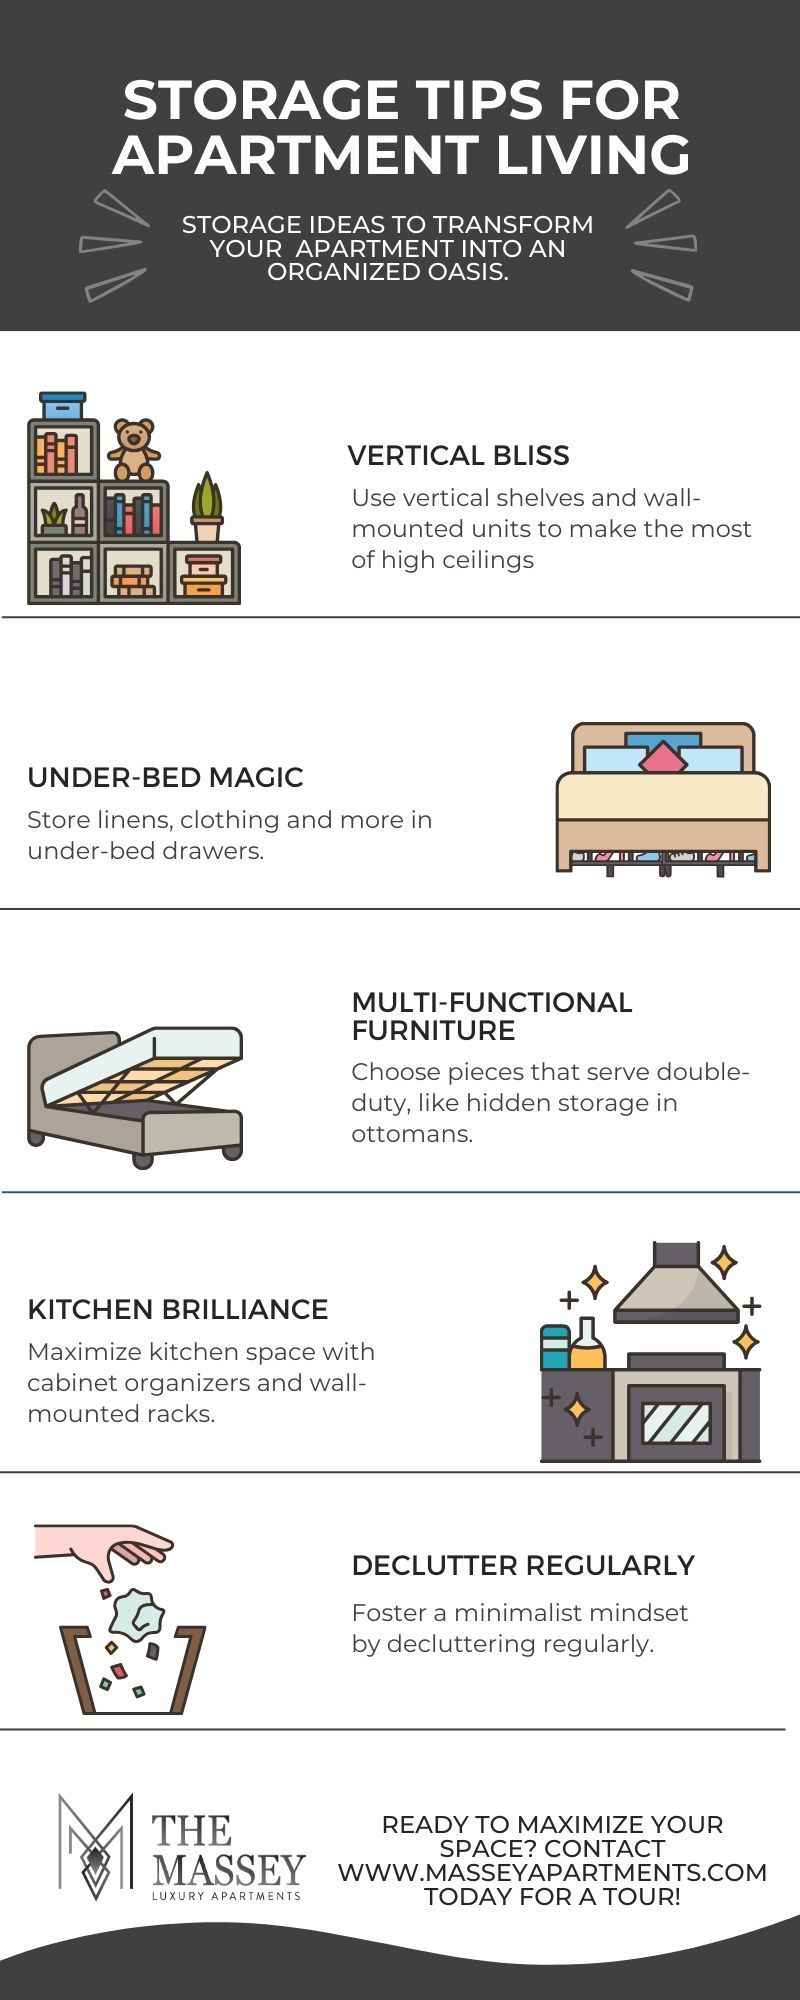 M31994 - Infographic - Storage Tips for Apartment Living (1).jpg